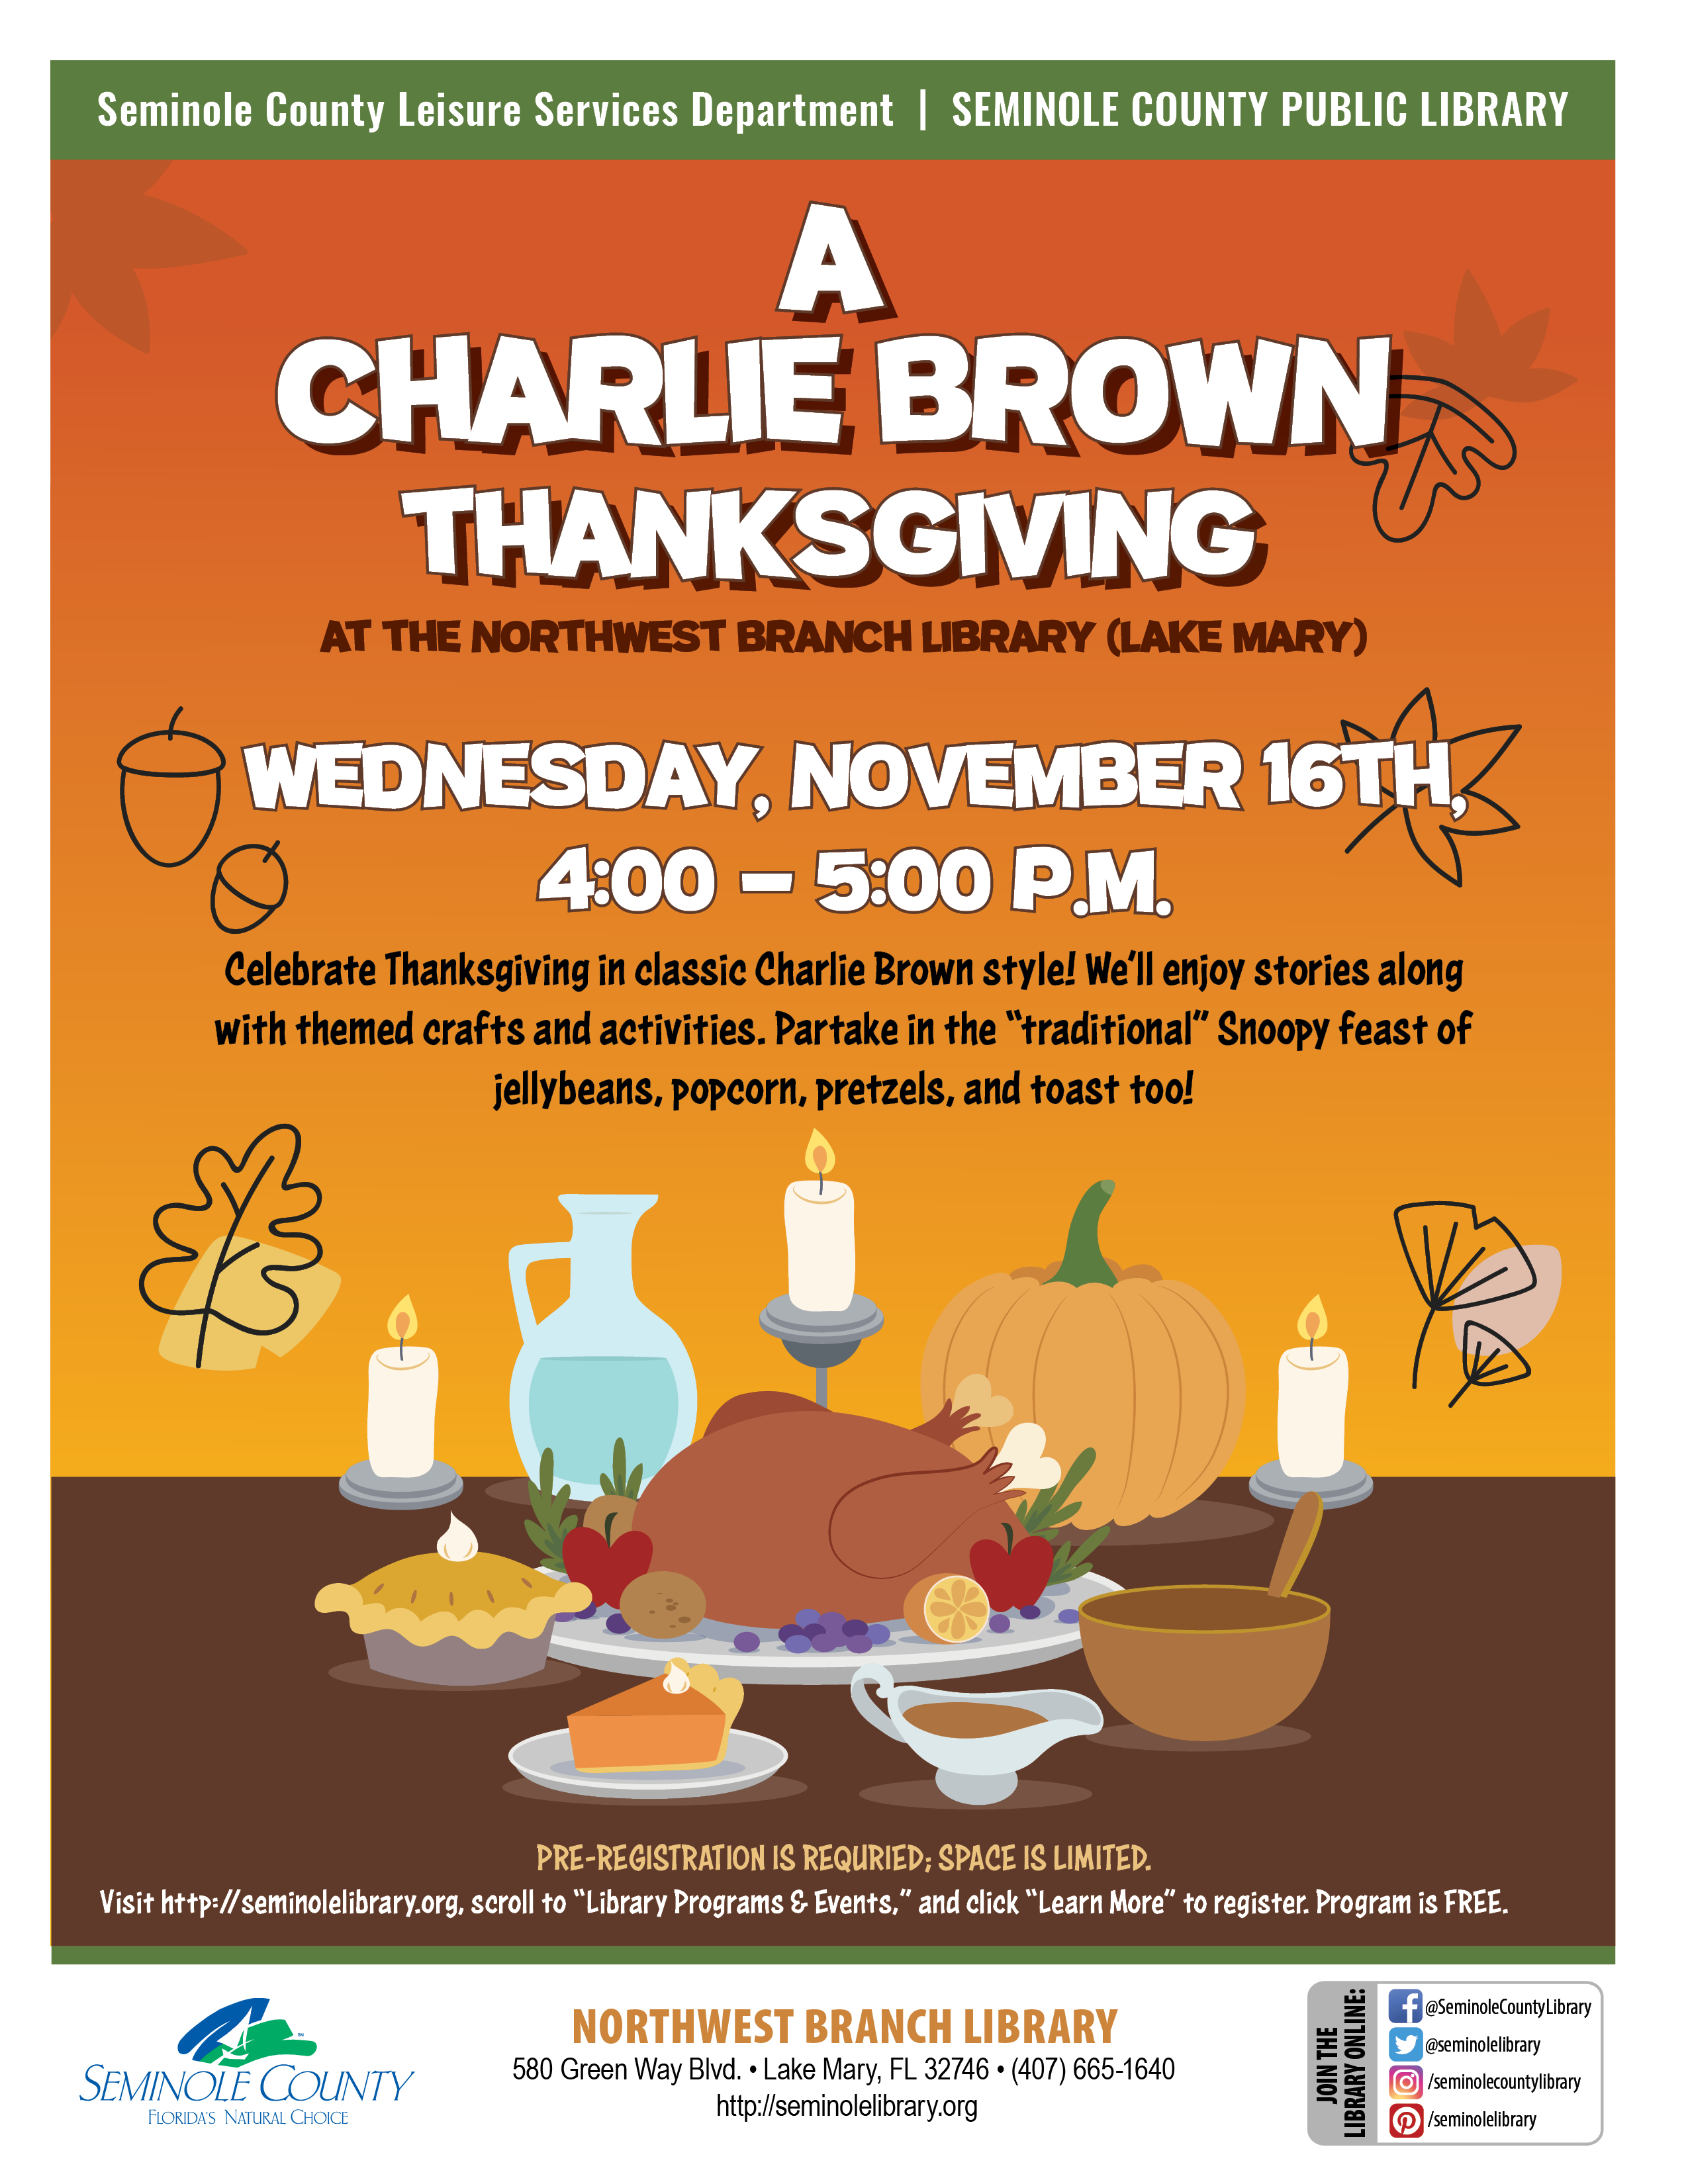 A Charlie Brown Thanksgiving - Northwest Branch Library